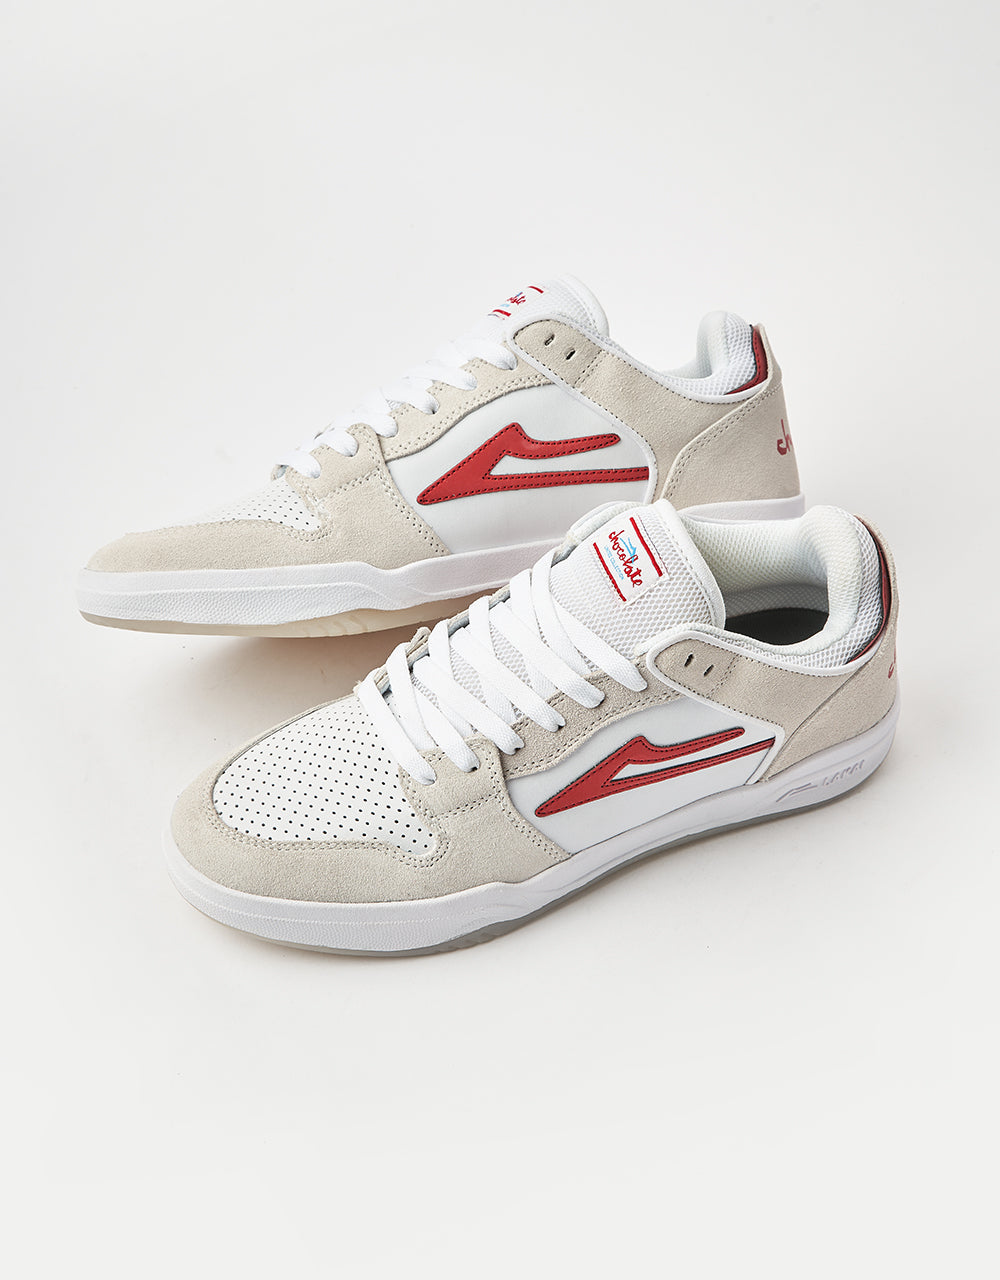 Lakai x Chocolate Telford Low Skate Shoes - White/Red Suede